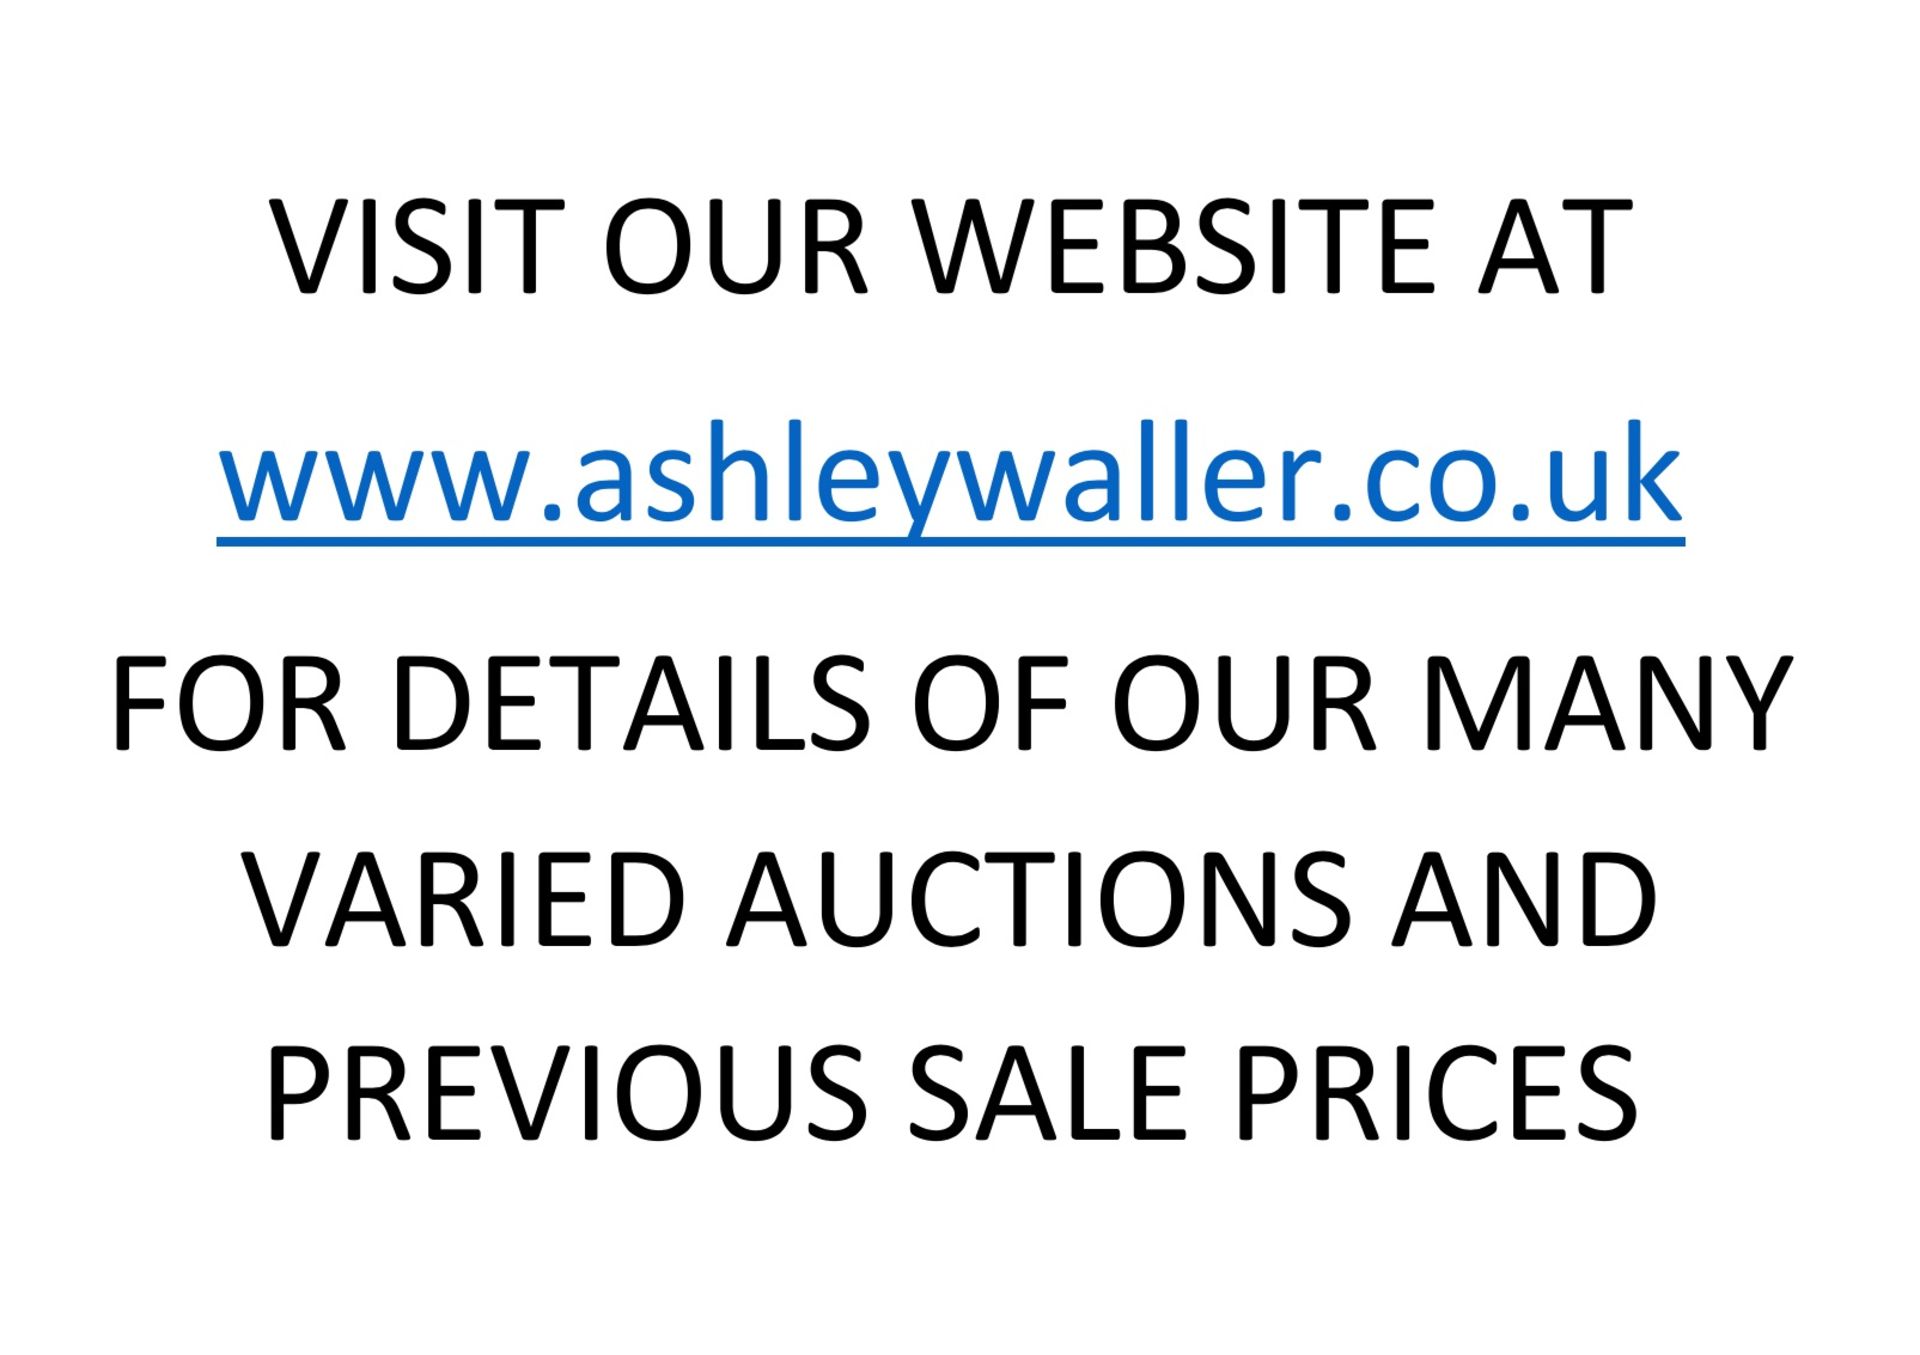 END OF SALE. THANK YOU FOR YOUR BIDDING, OUR NEXT MONTHLY MACHINERY AUCTION IS TUESDAY 11TH APRIL